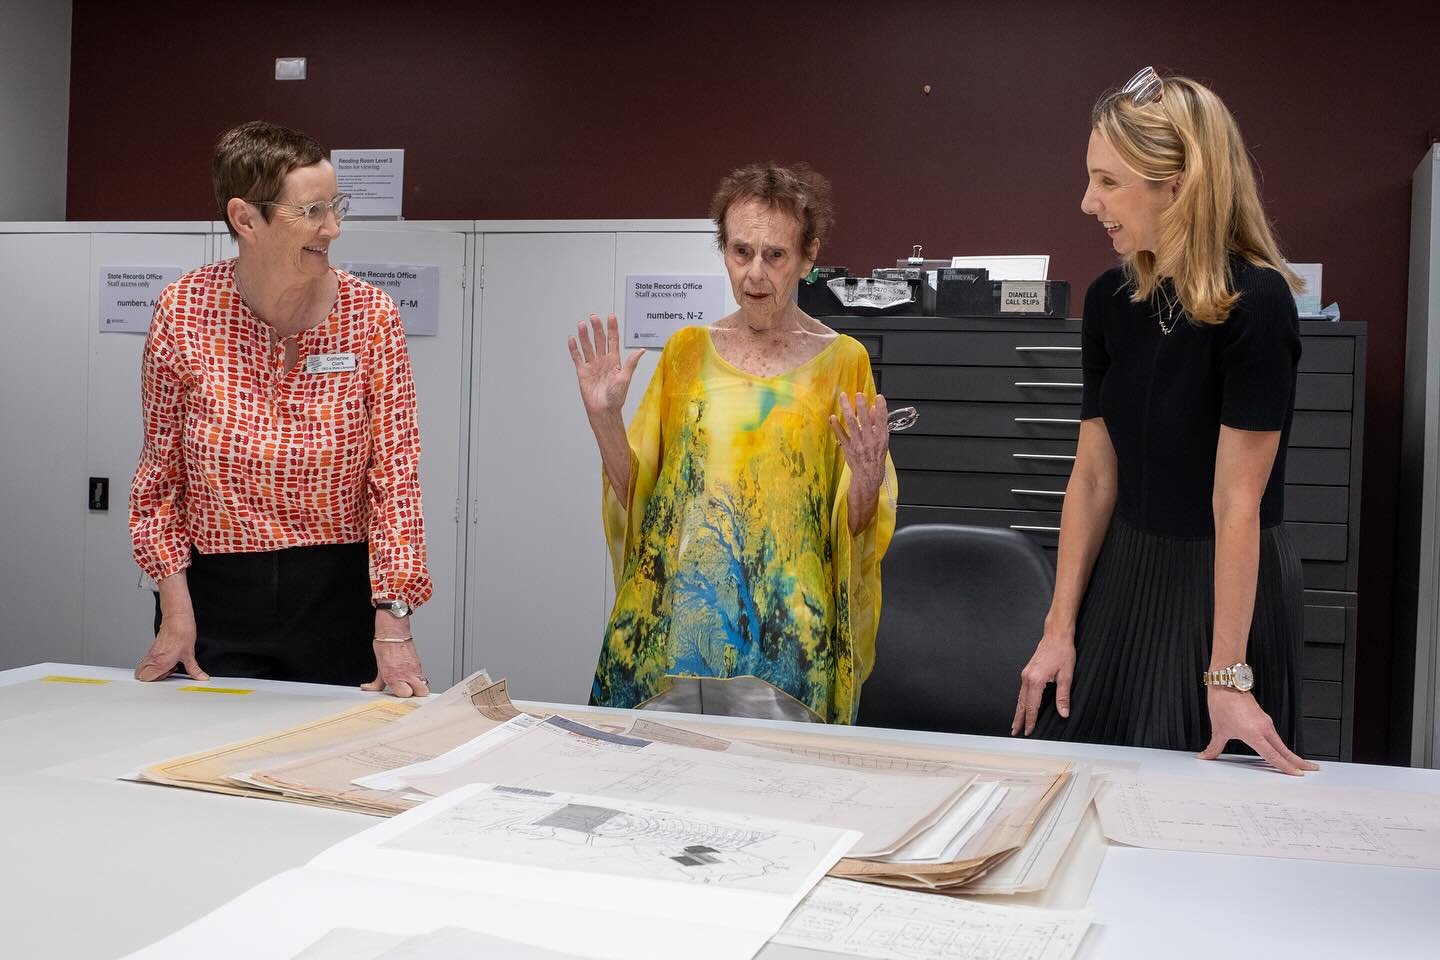 An honour and a privilege to join State Library of Western Australia CEO Catherine Clark to meet Diana Waldron OAM to receive her gift of over 1500 architectural drawings from the collection of her late husband Ken Waldron, architect for the Quarry A